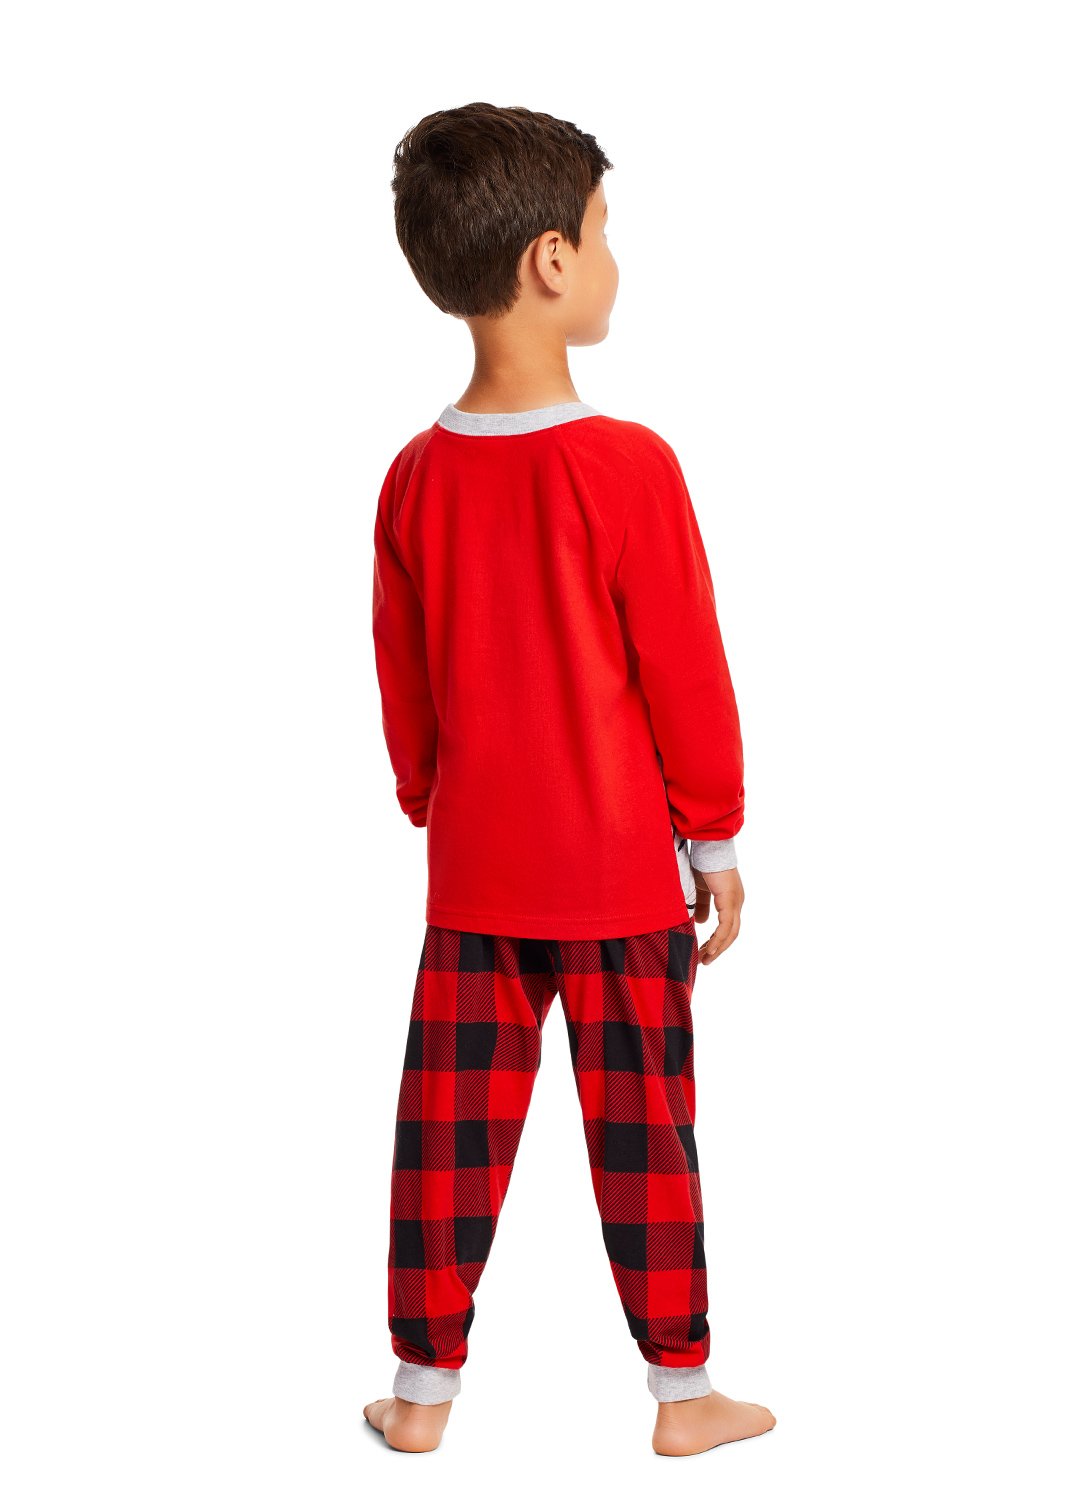 Back view Kid wearing Mickey Mouse pajama 2 pieces